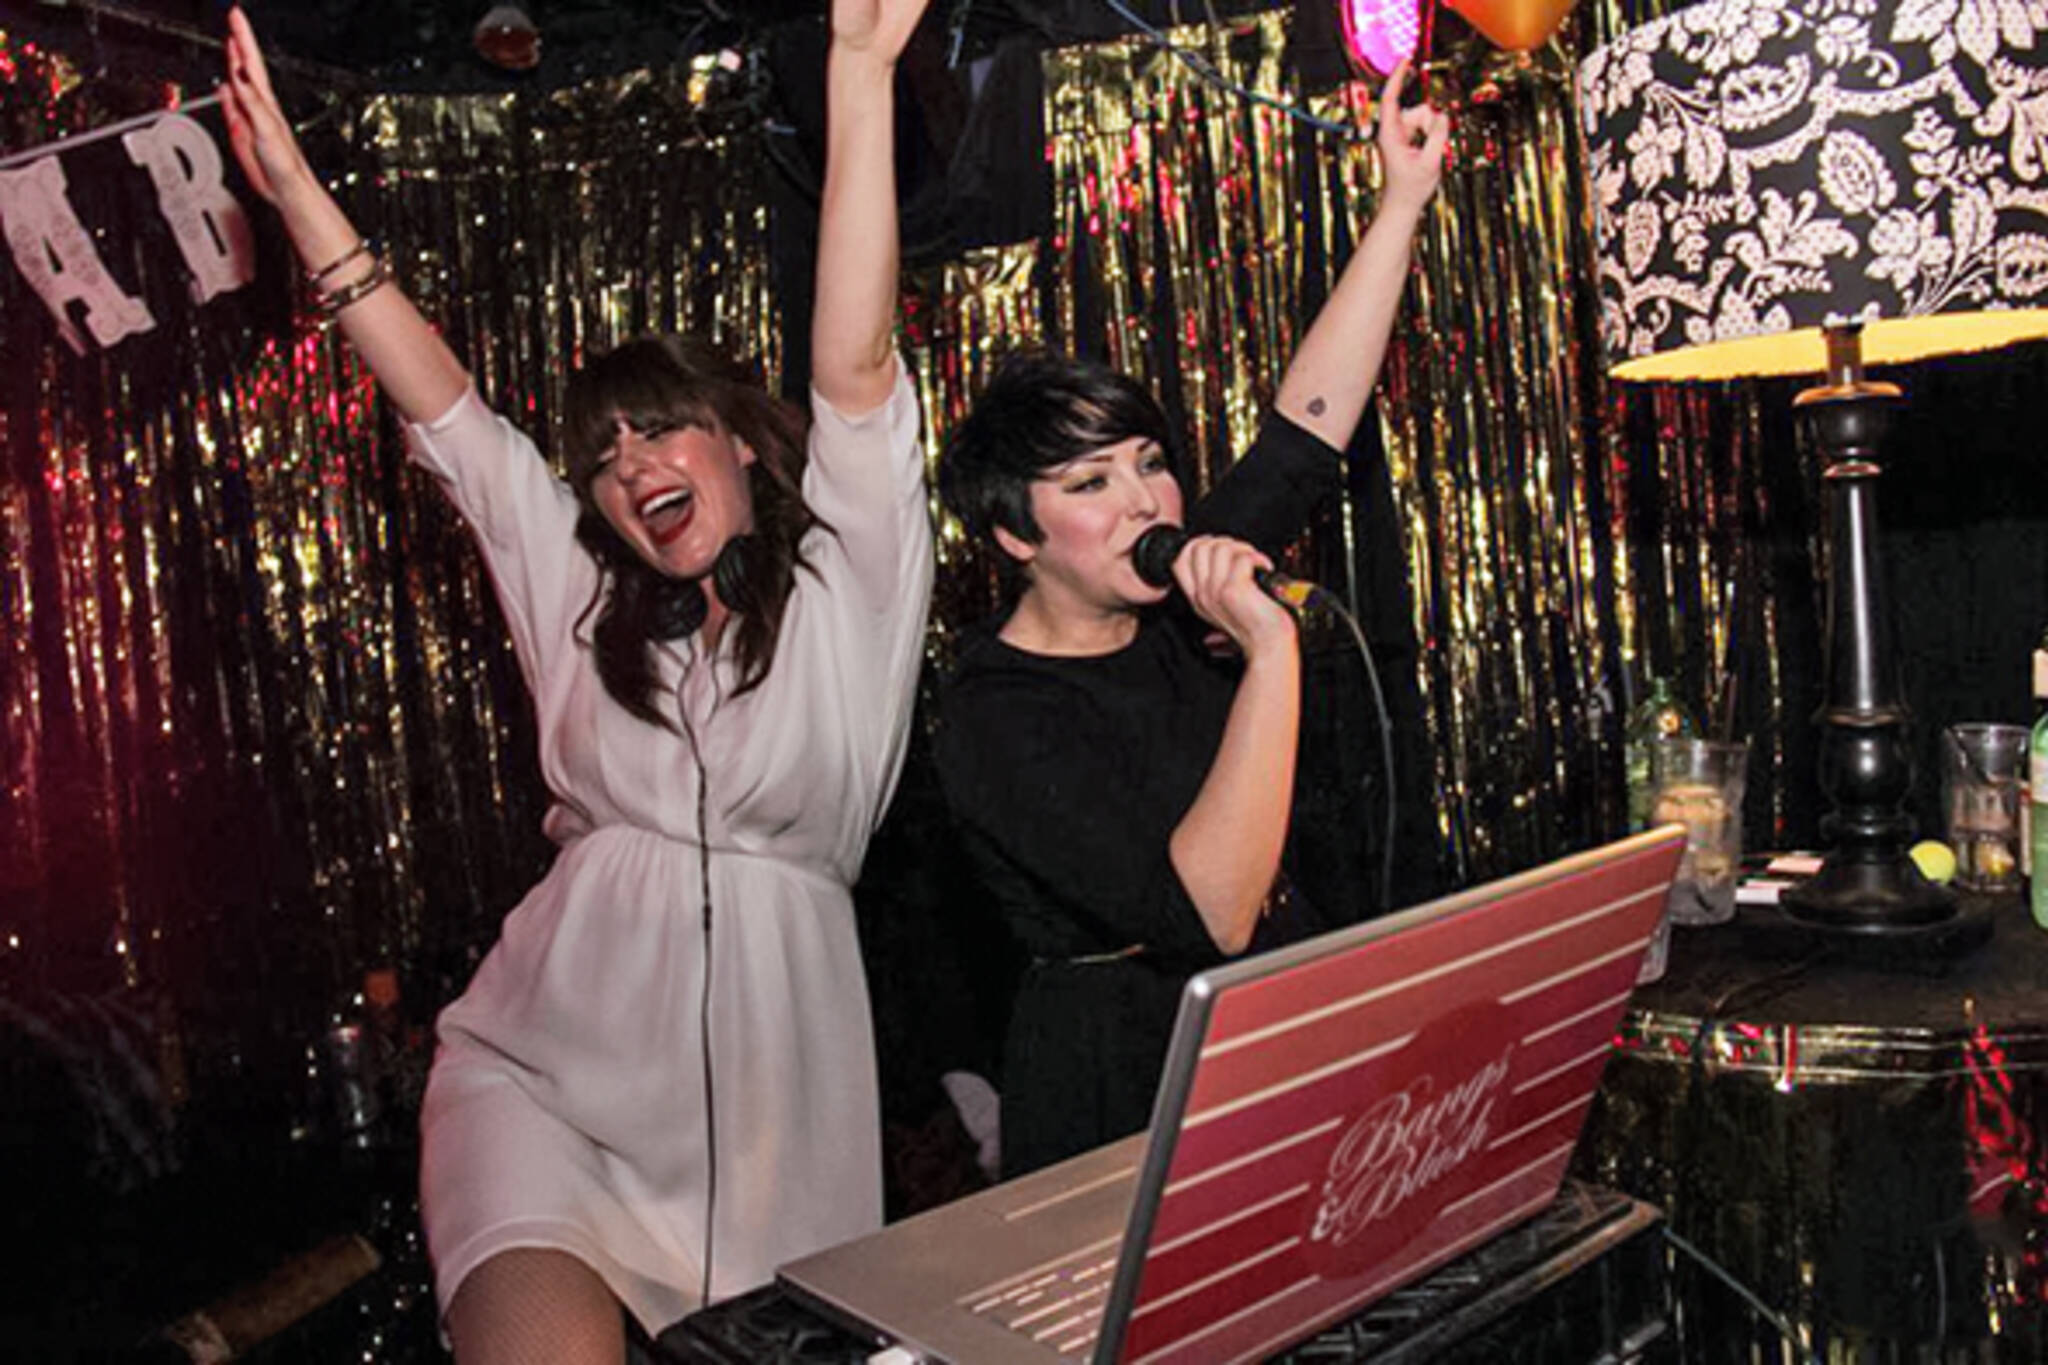 The Top 10 Themed Dance Parties In Toronto